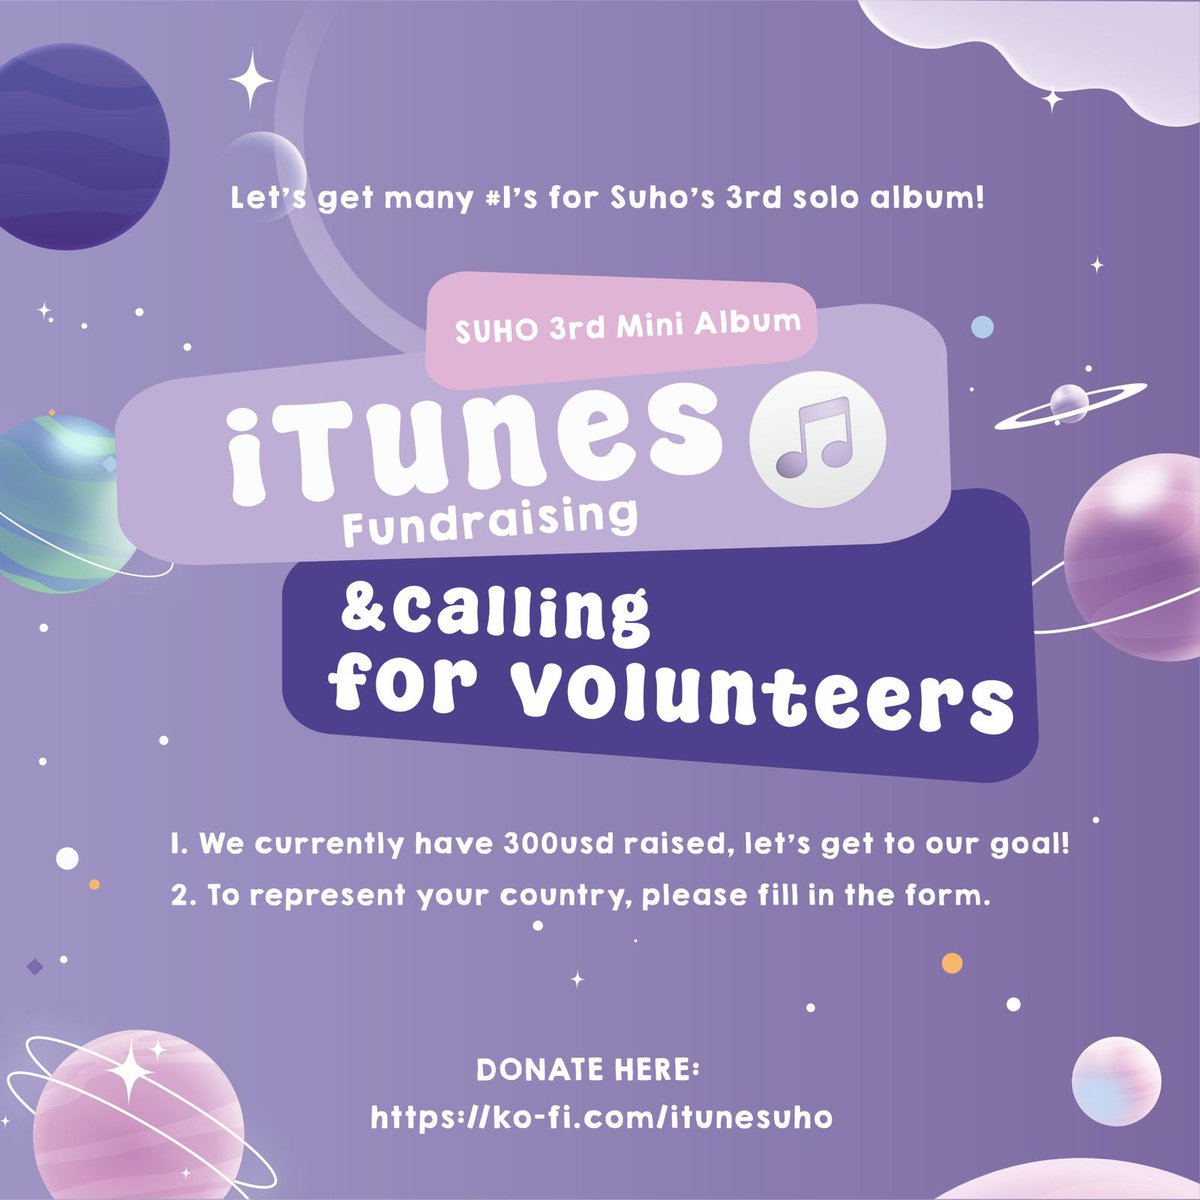 [iTunes Project] 🎵 Calling all the EXO-Ls & Bunnyzens!🗣 SUHO 3rd Mini Album '점선면 (1 to 3)' is coming and you have 2 ways to help: 🪐1. Being a voluntary iTunes buyer. 🪐2. Donating any amount to the fundraiser. 🔗More info: linktr.ee/itunesuho #SUHO #수호 @weareoneEXO